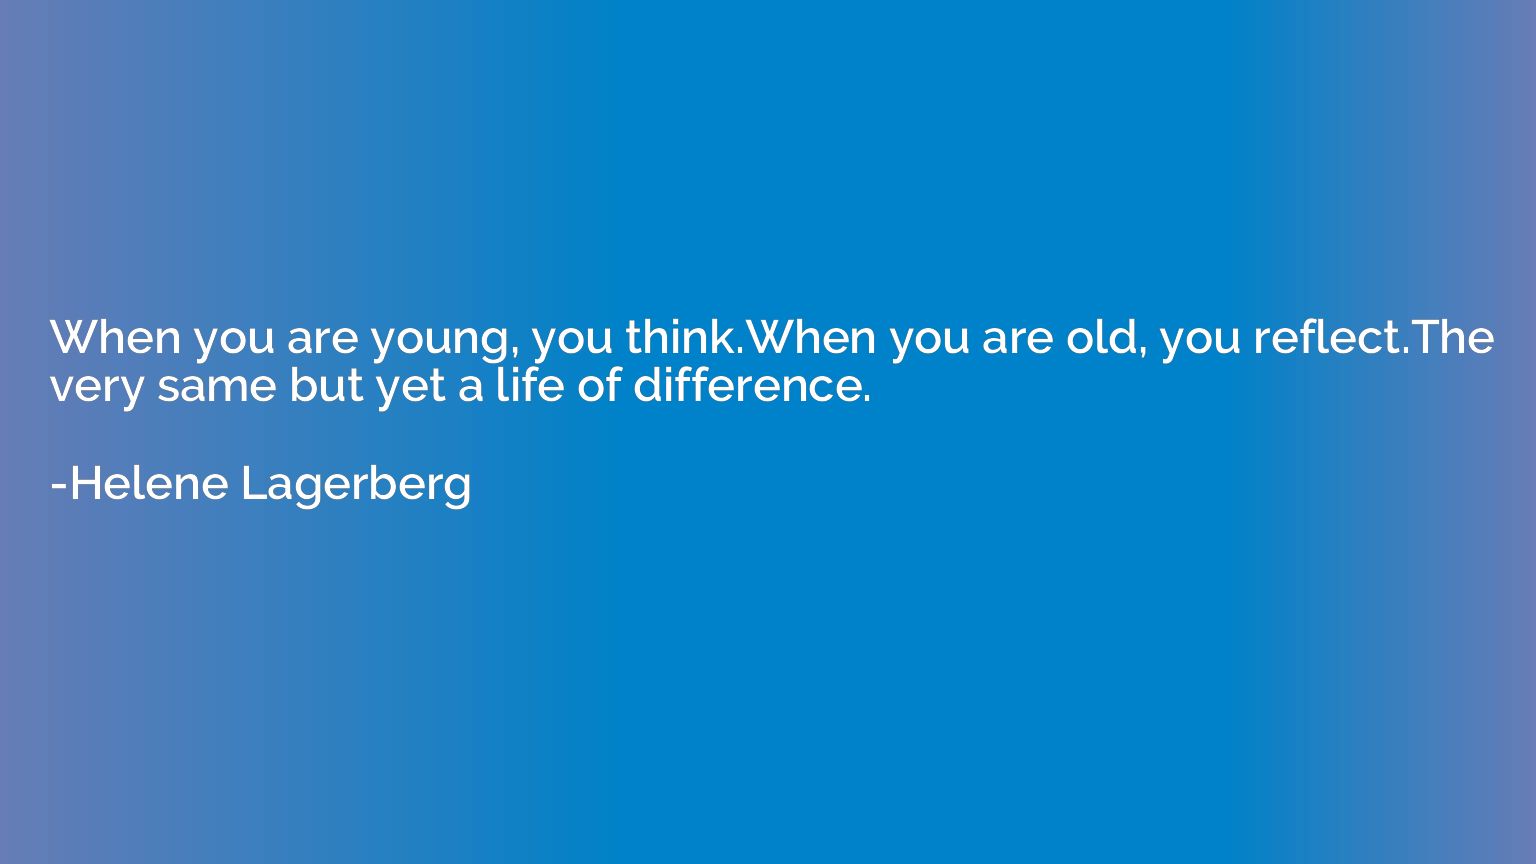 When you are young, you think.When you are old, you reflect.